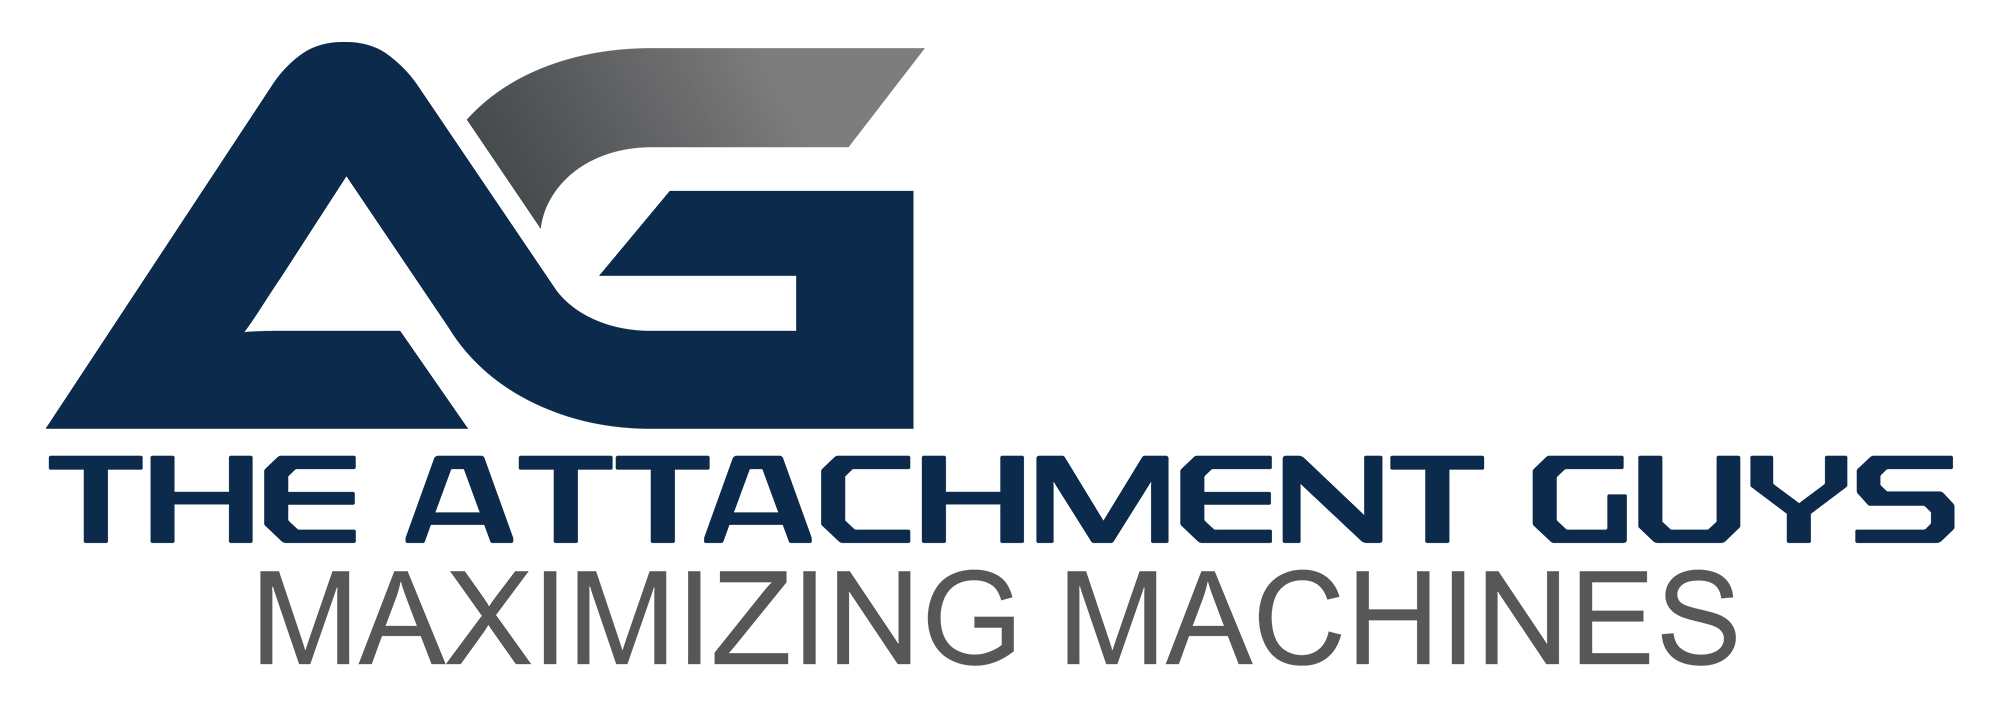 The Attachment Guys, Maximizing Machines